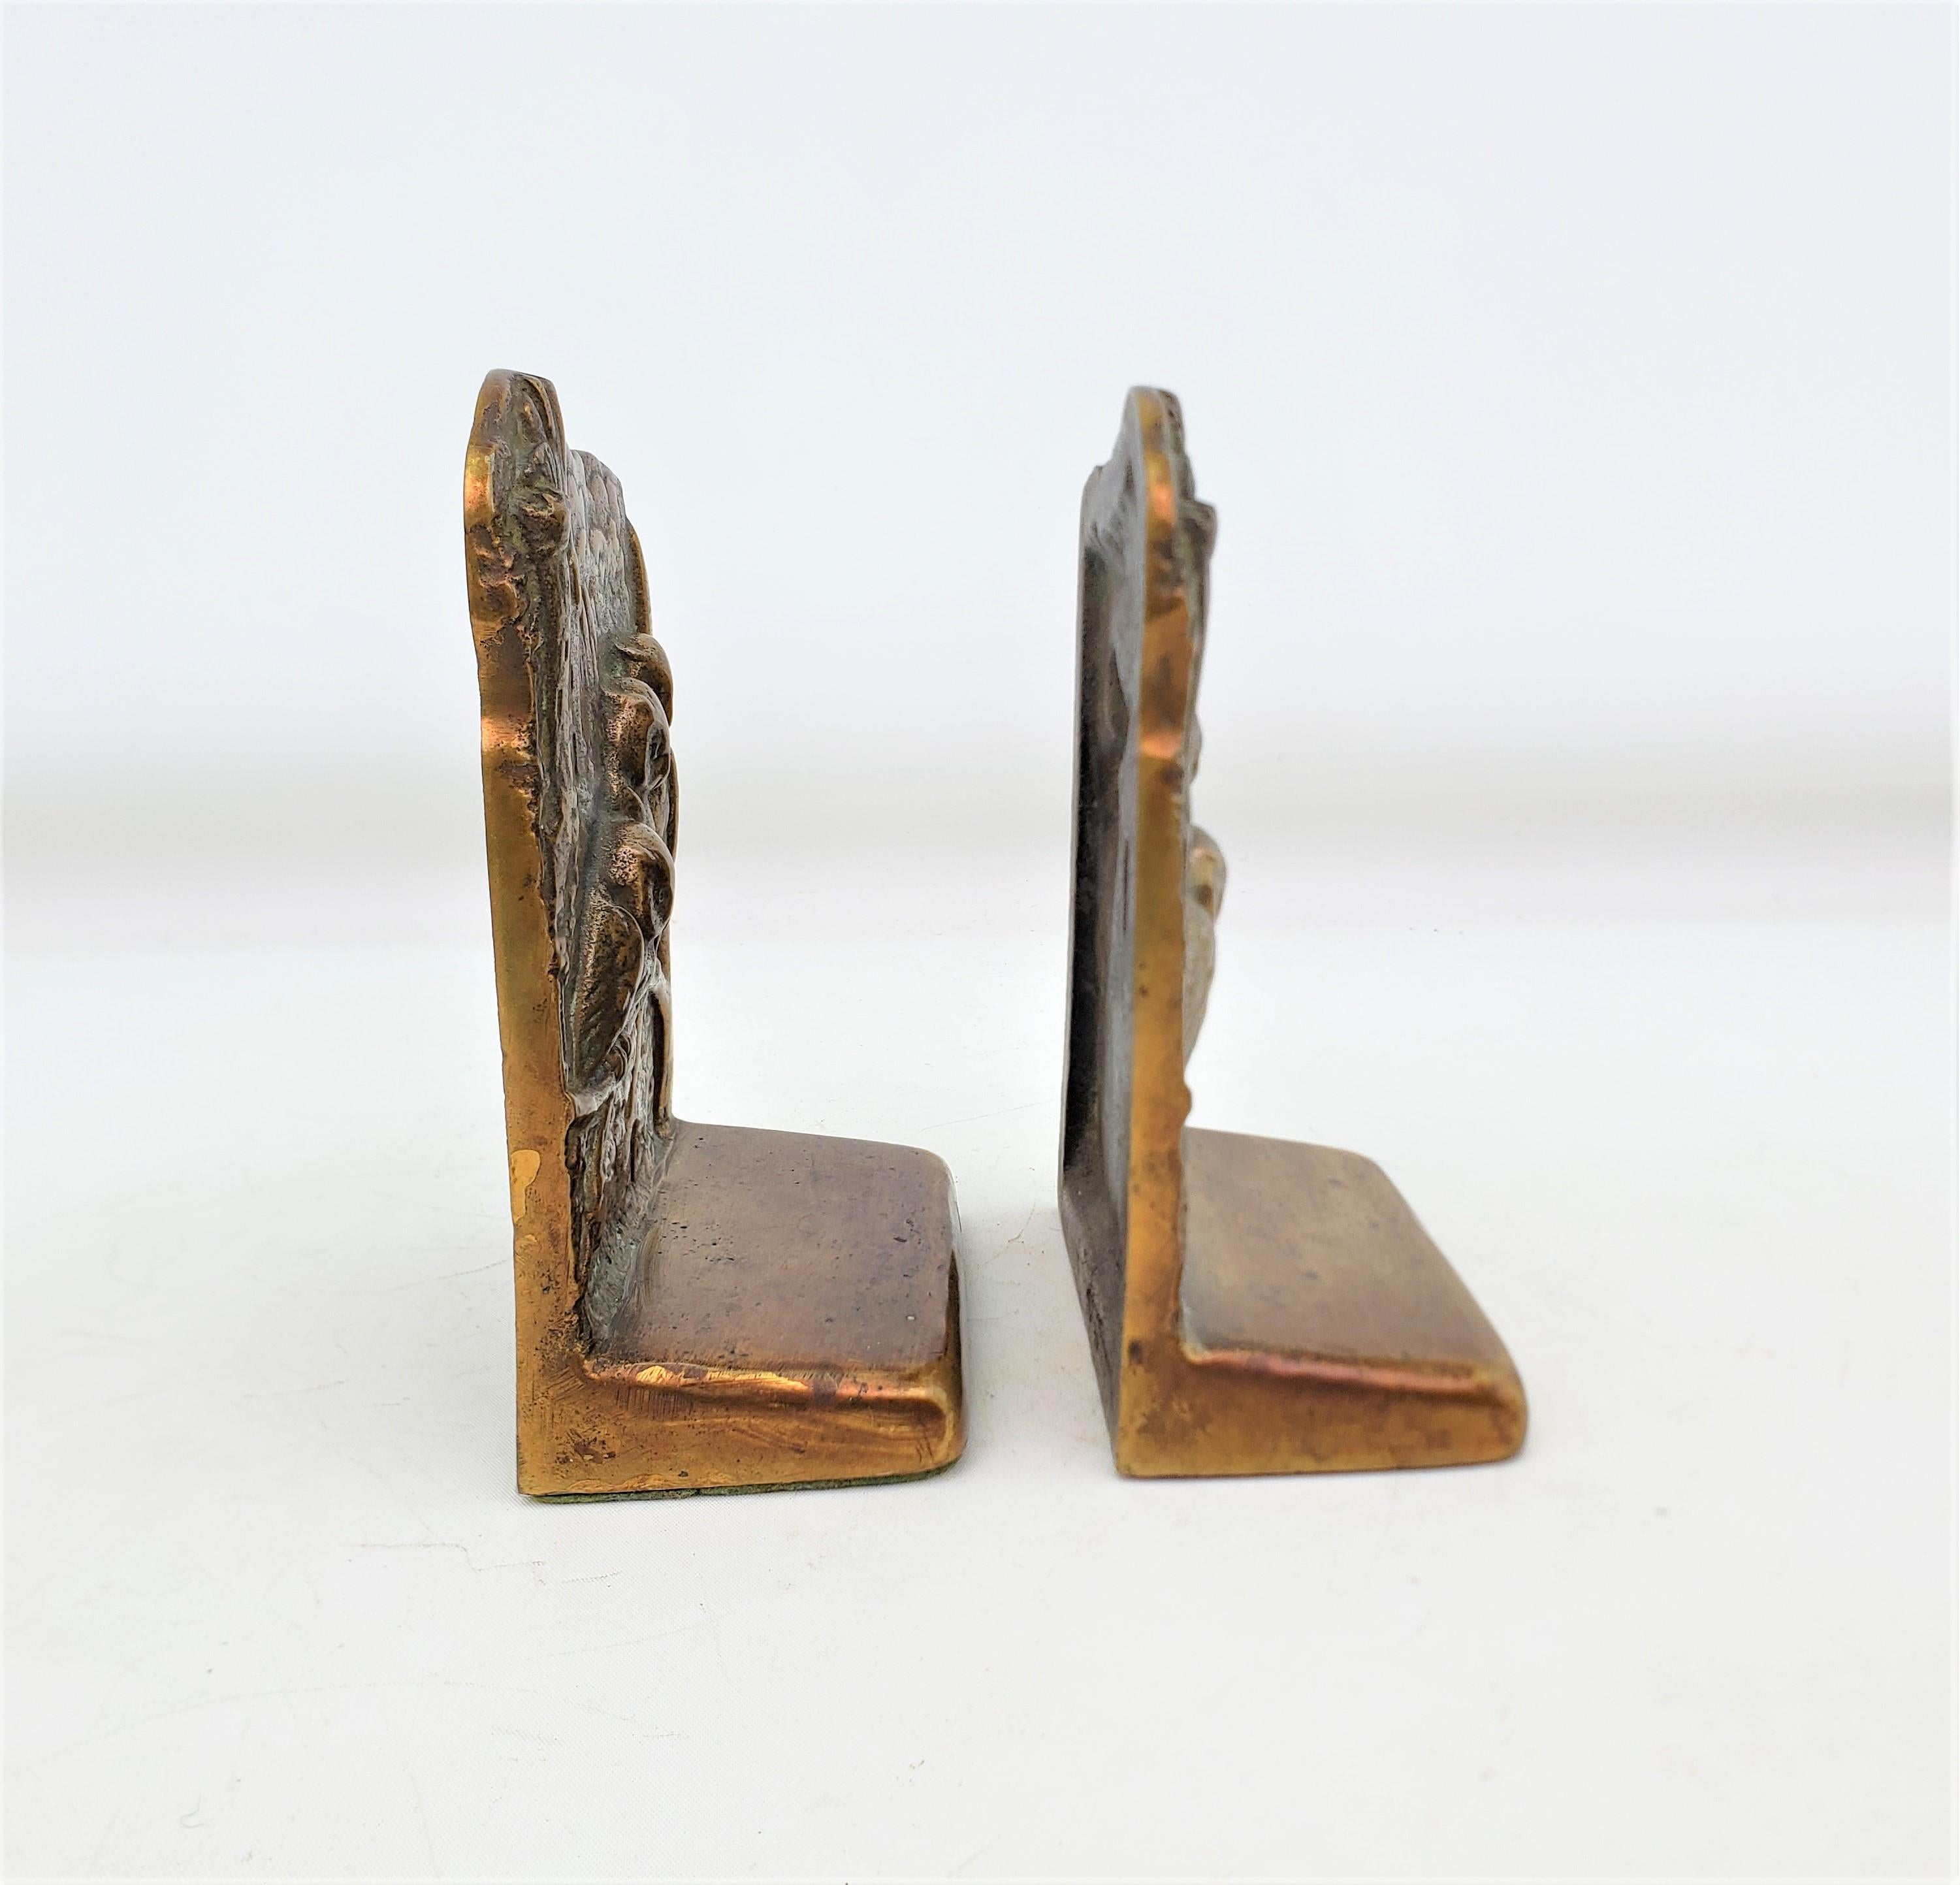 Antique Art Deco Cast & Patinated Brass Bookends Depicting Three Perched Owls For Sale 1